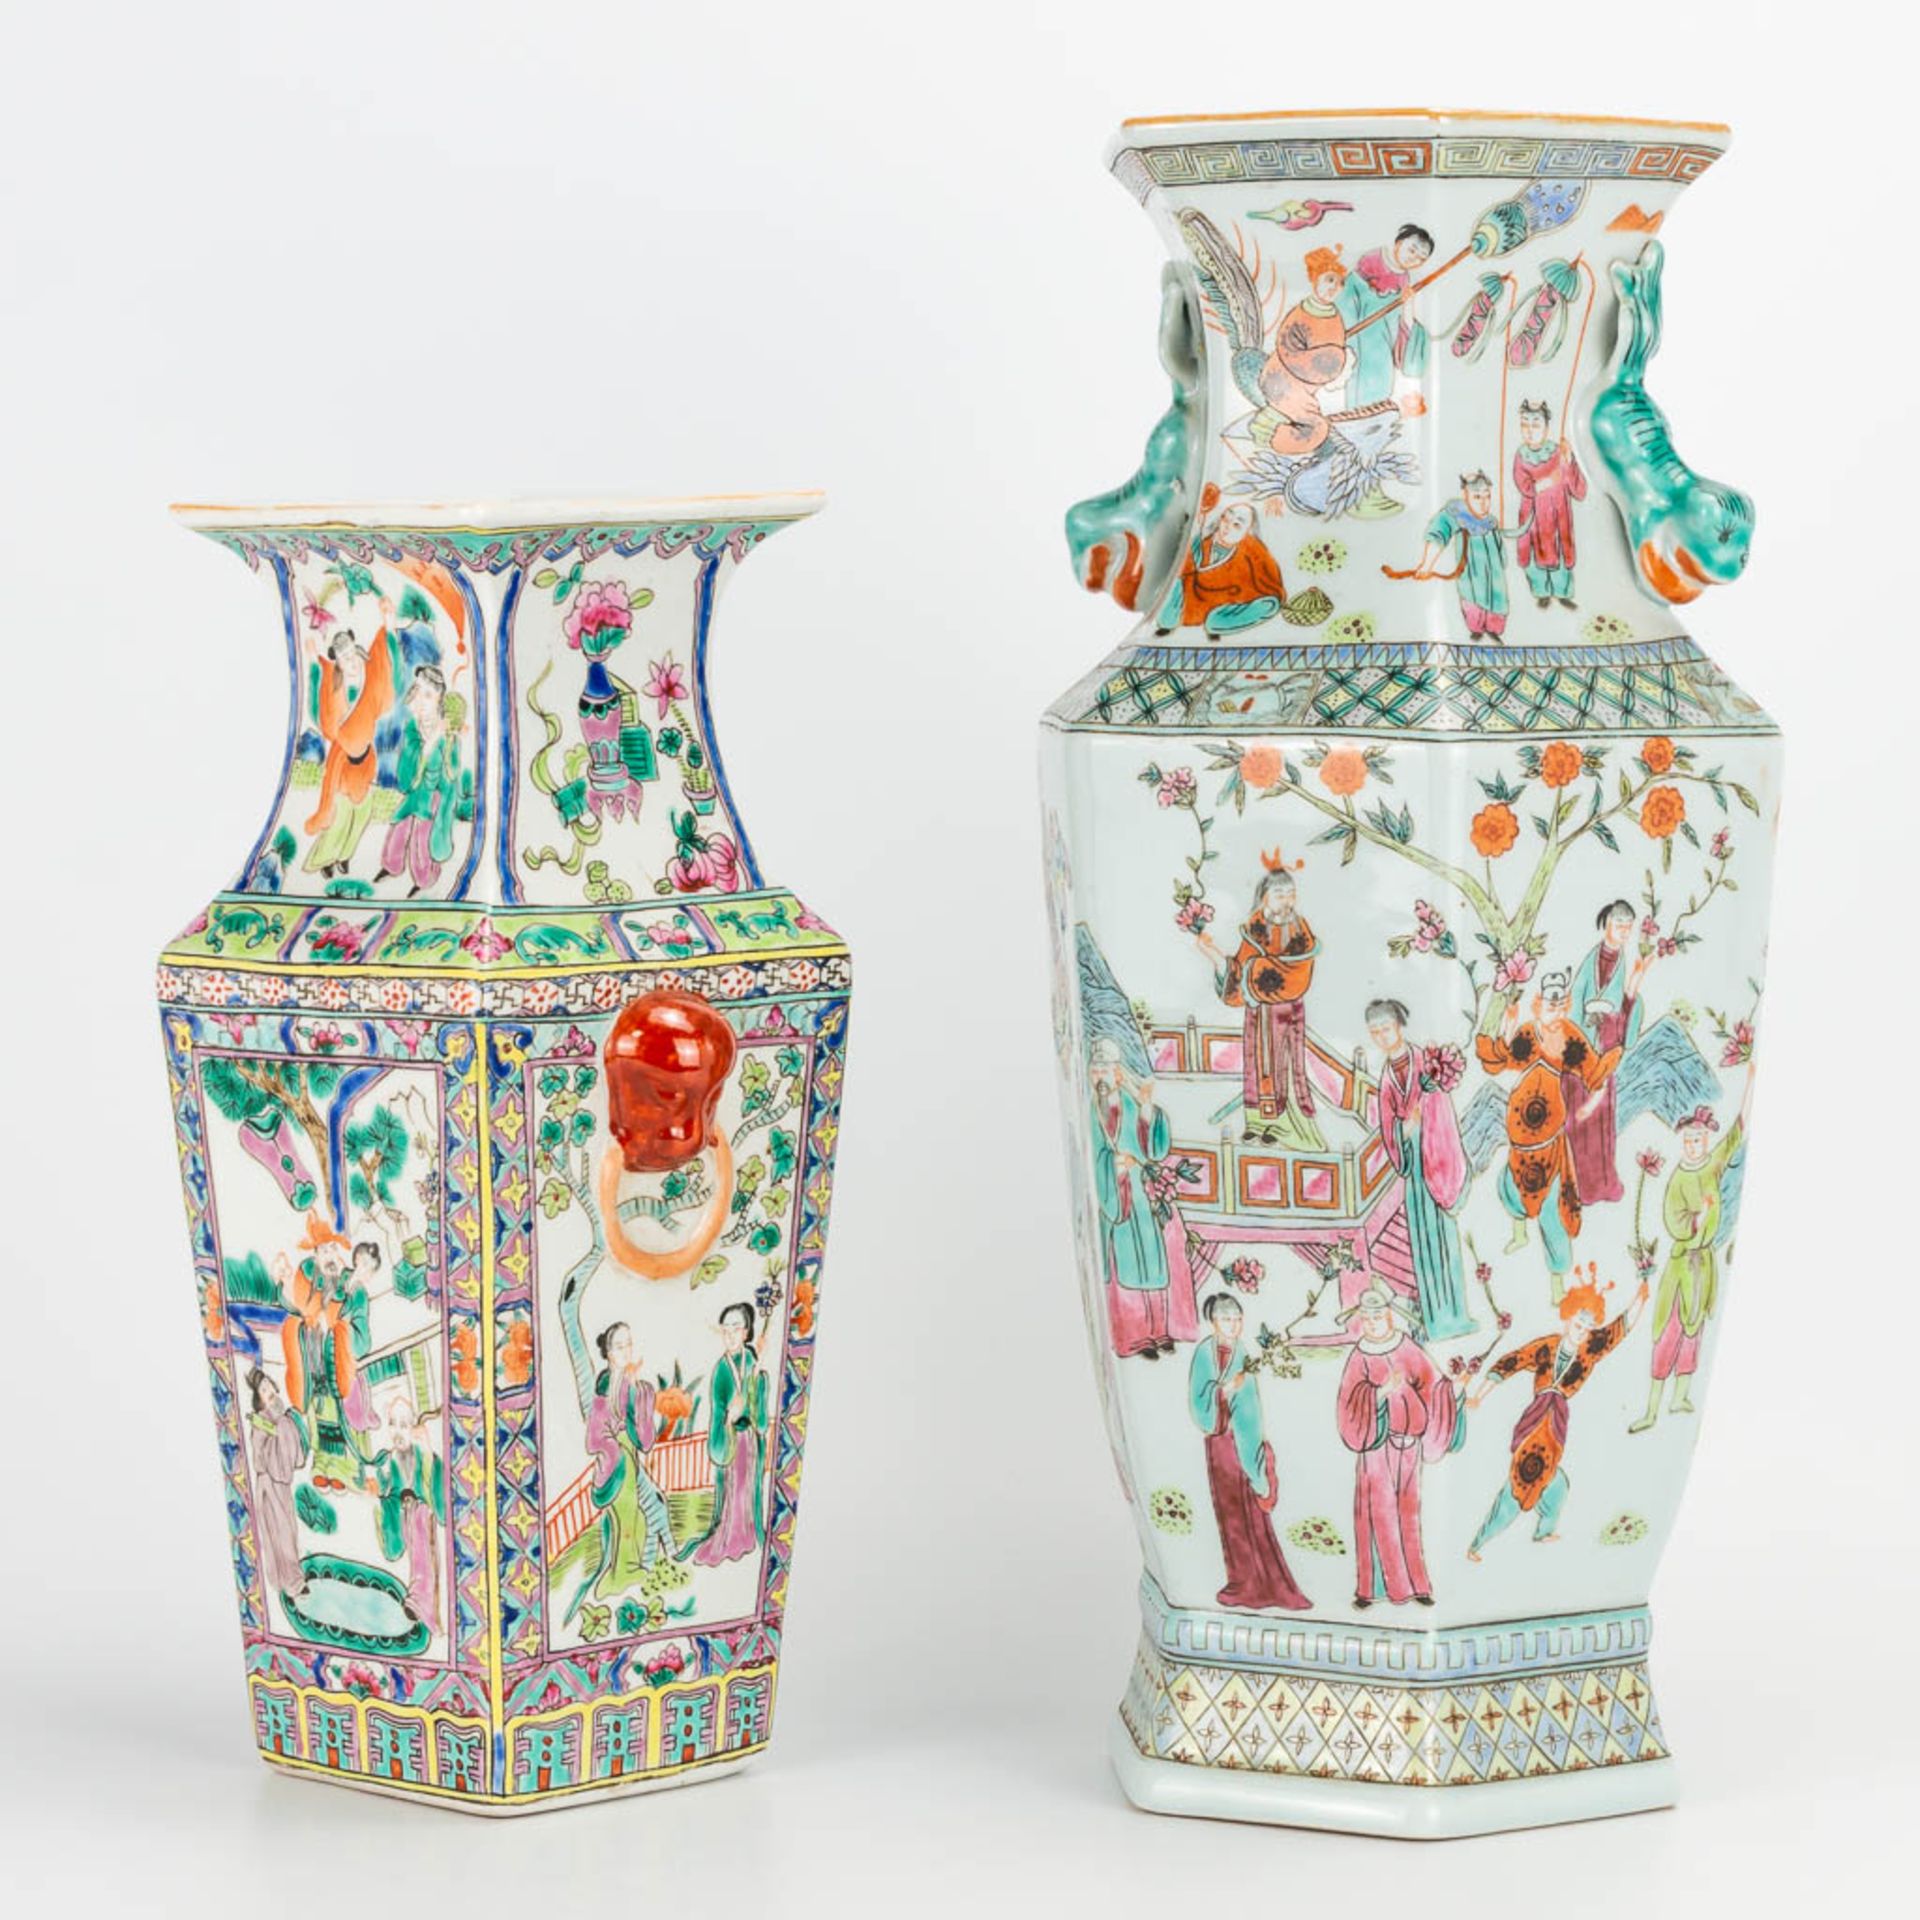 A collection of 2 Chinese vases with decor of emperors, playing children and ladies in court. 20th c - Image 11 of 29